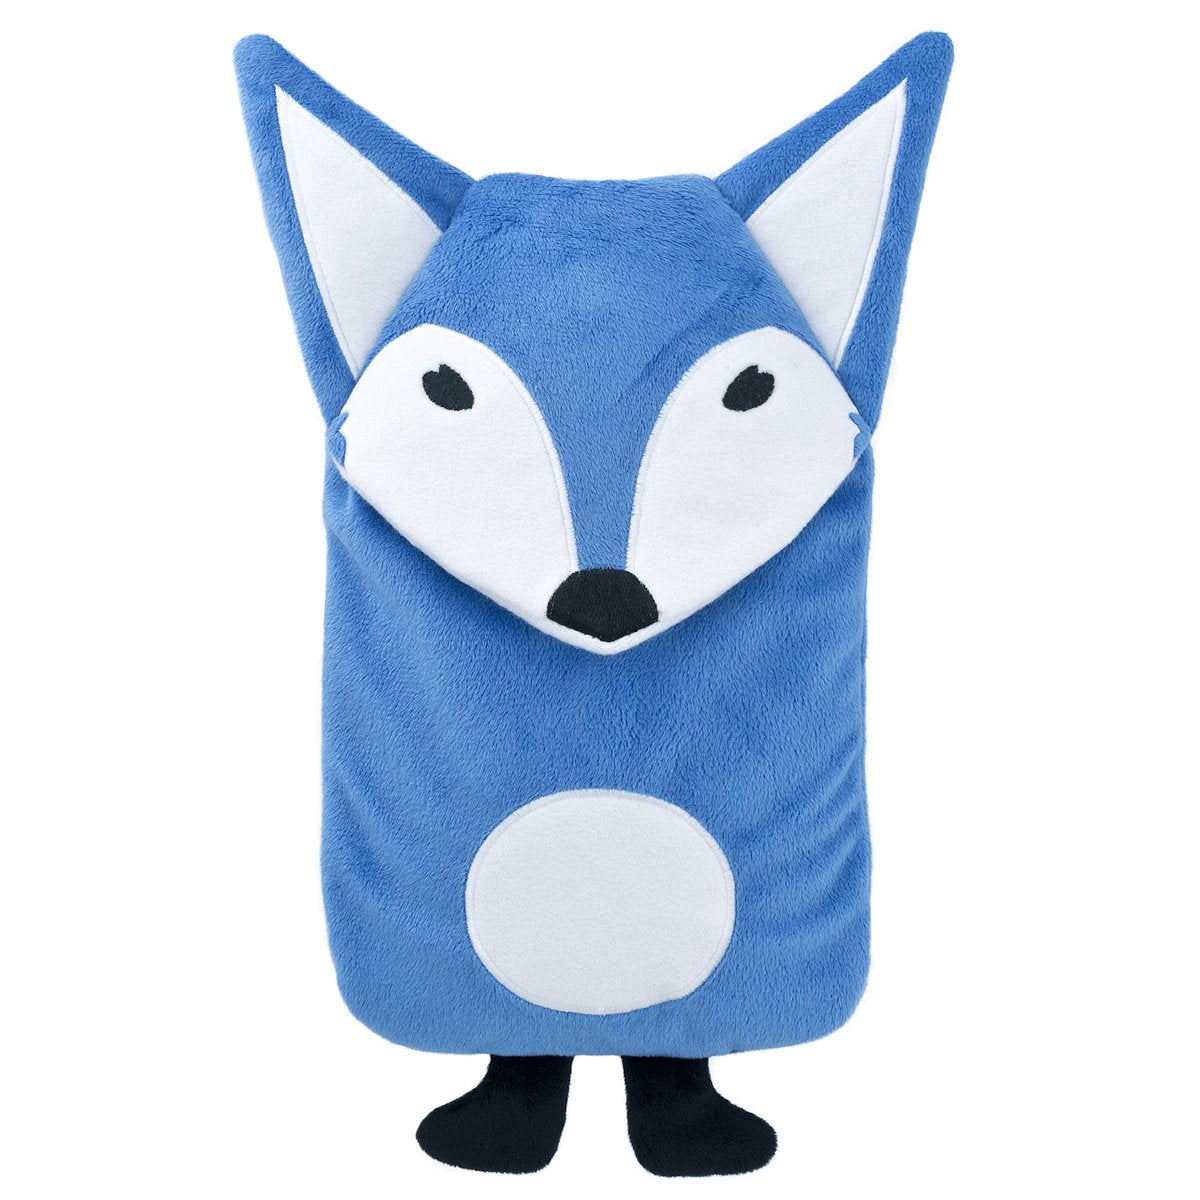 Kids Eco Hot Water Bottle Junior Comfort with Cover, Velour - Mrs. Fox Blue